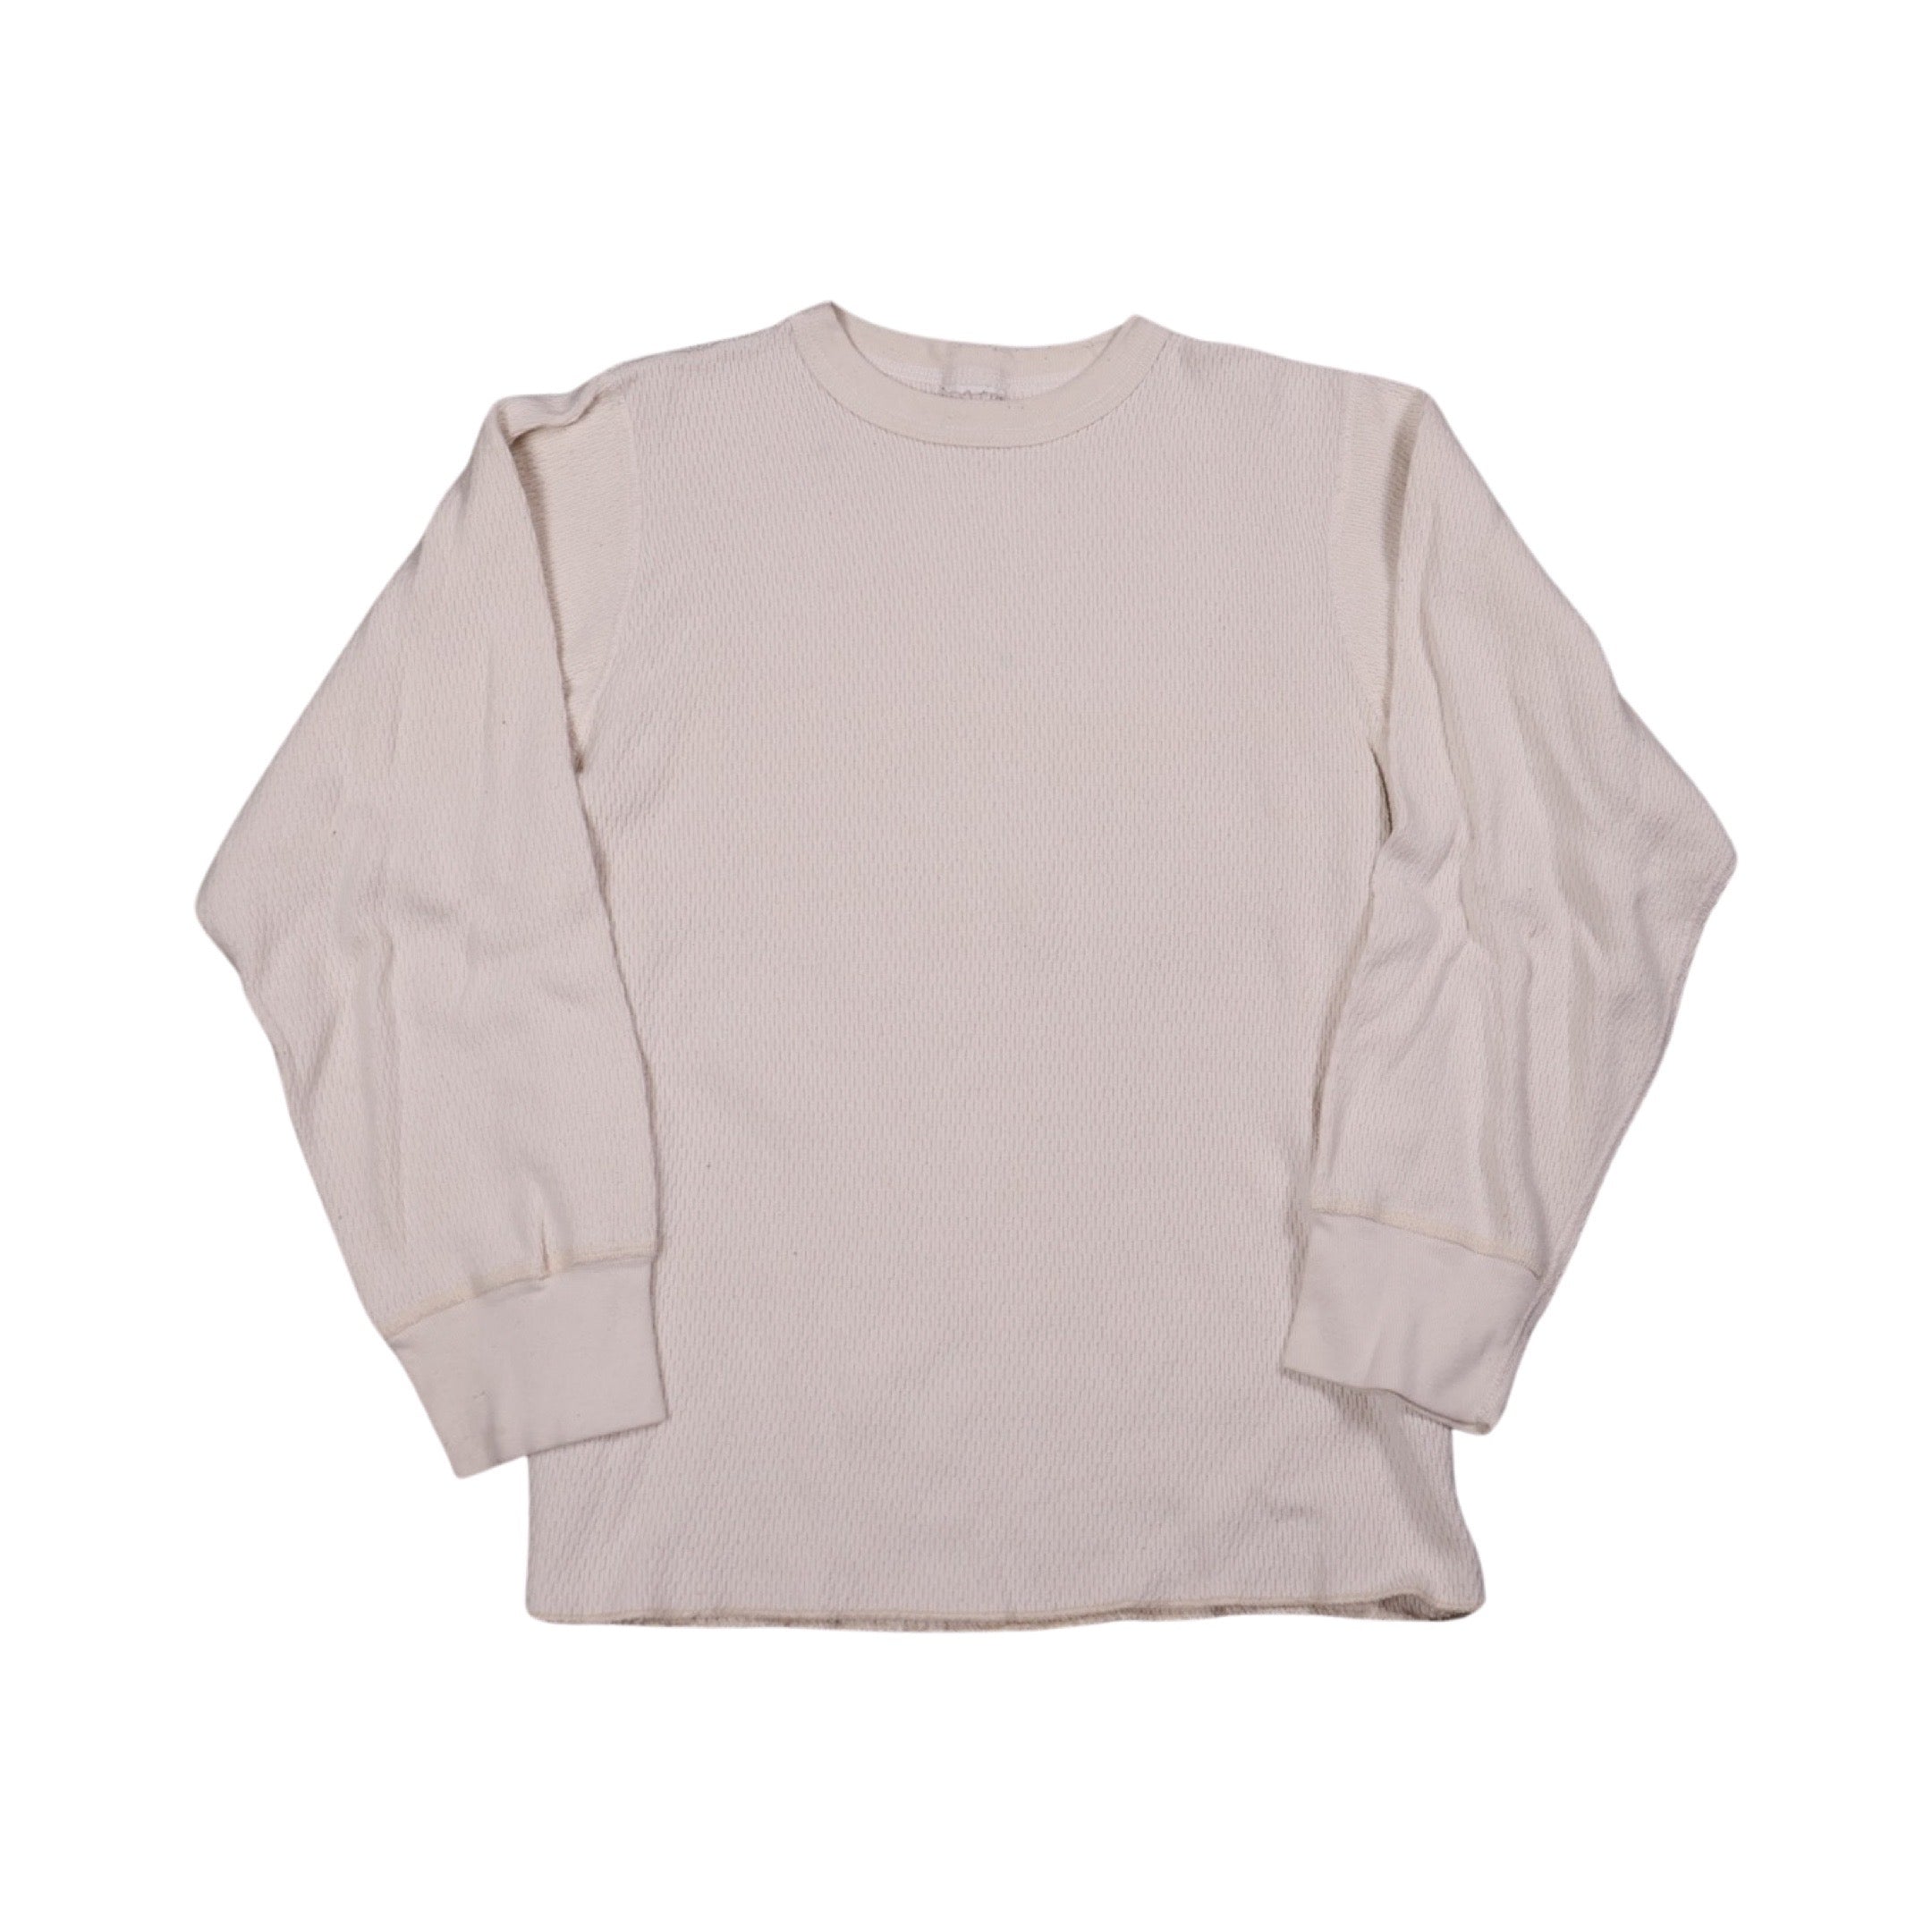 White Thermal Longsleeve 90s T-Shirt (Small)